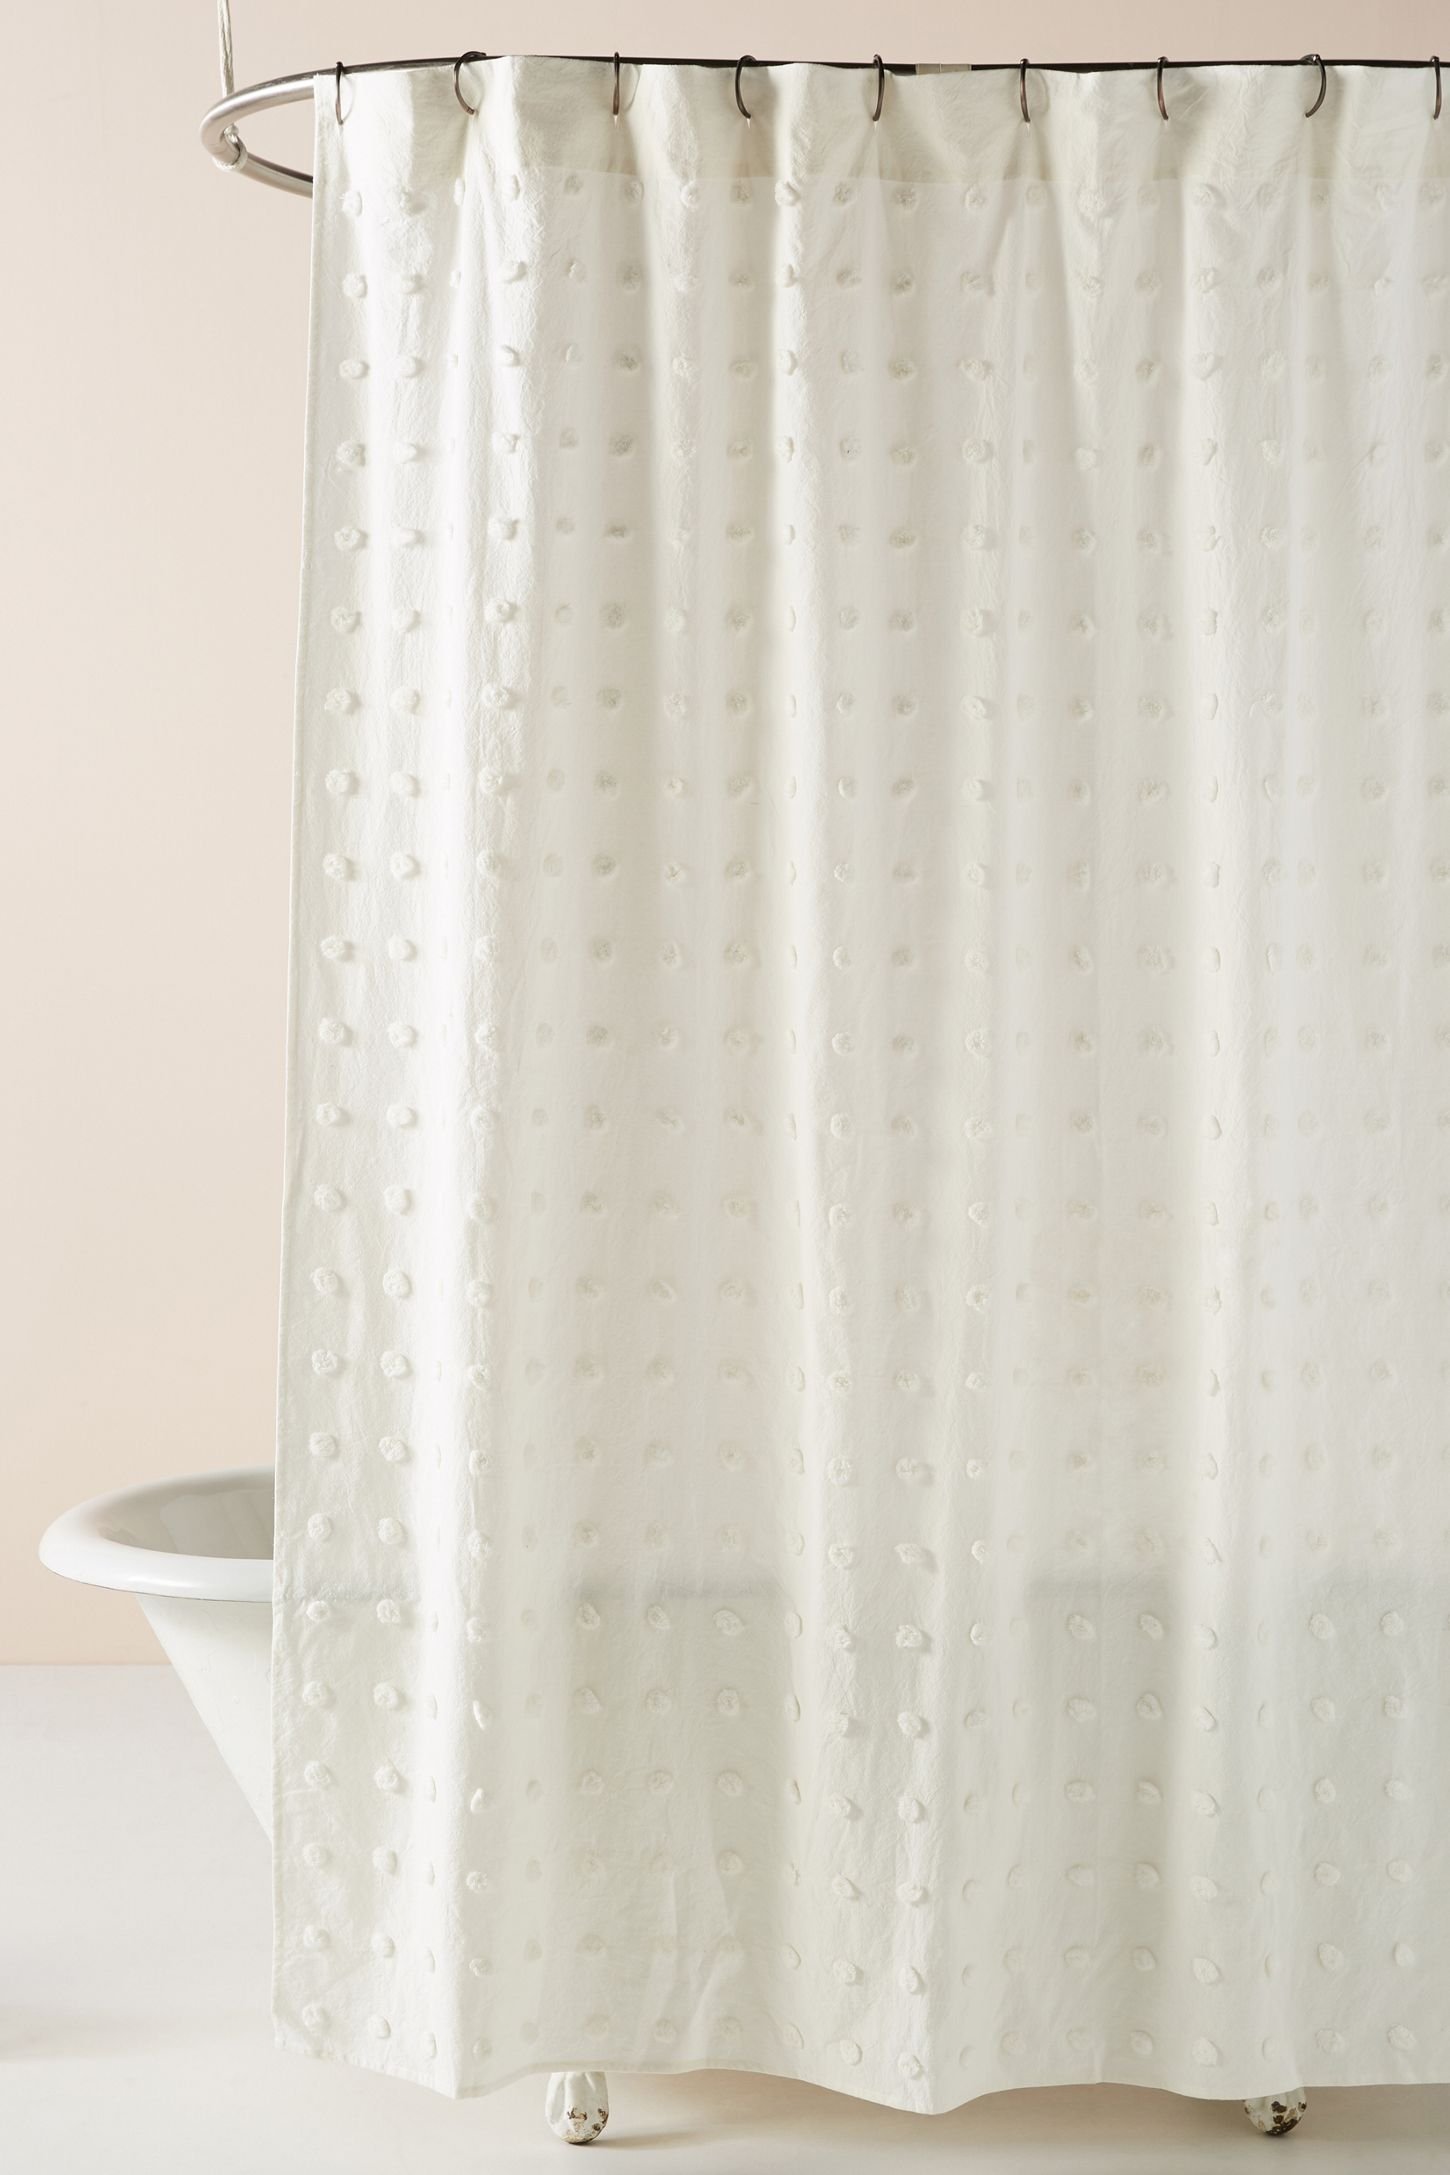 Tufted Makers Shower Curtain - Image 0